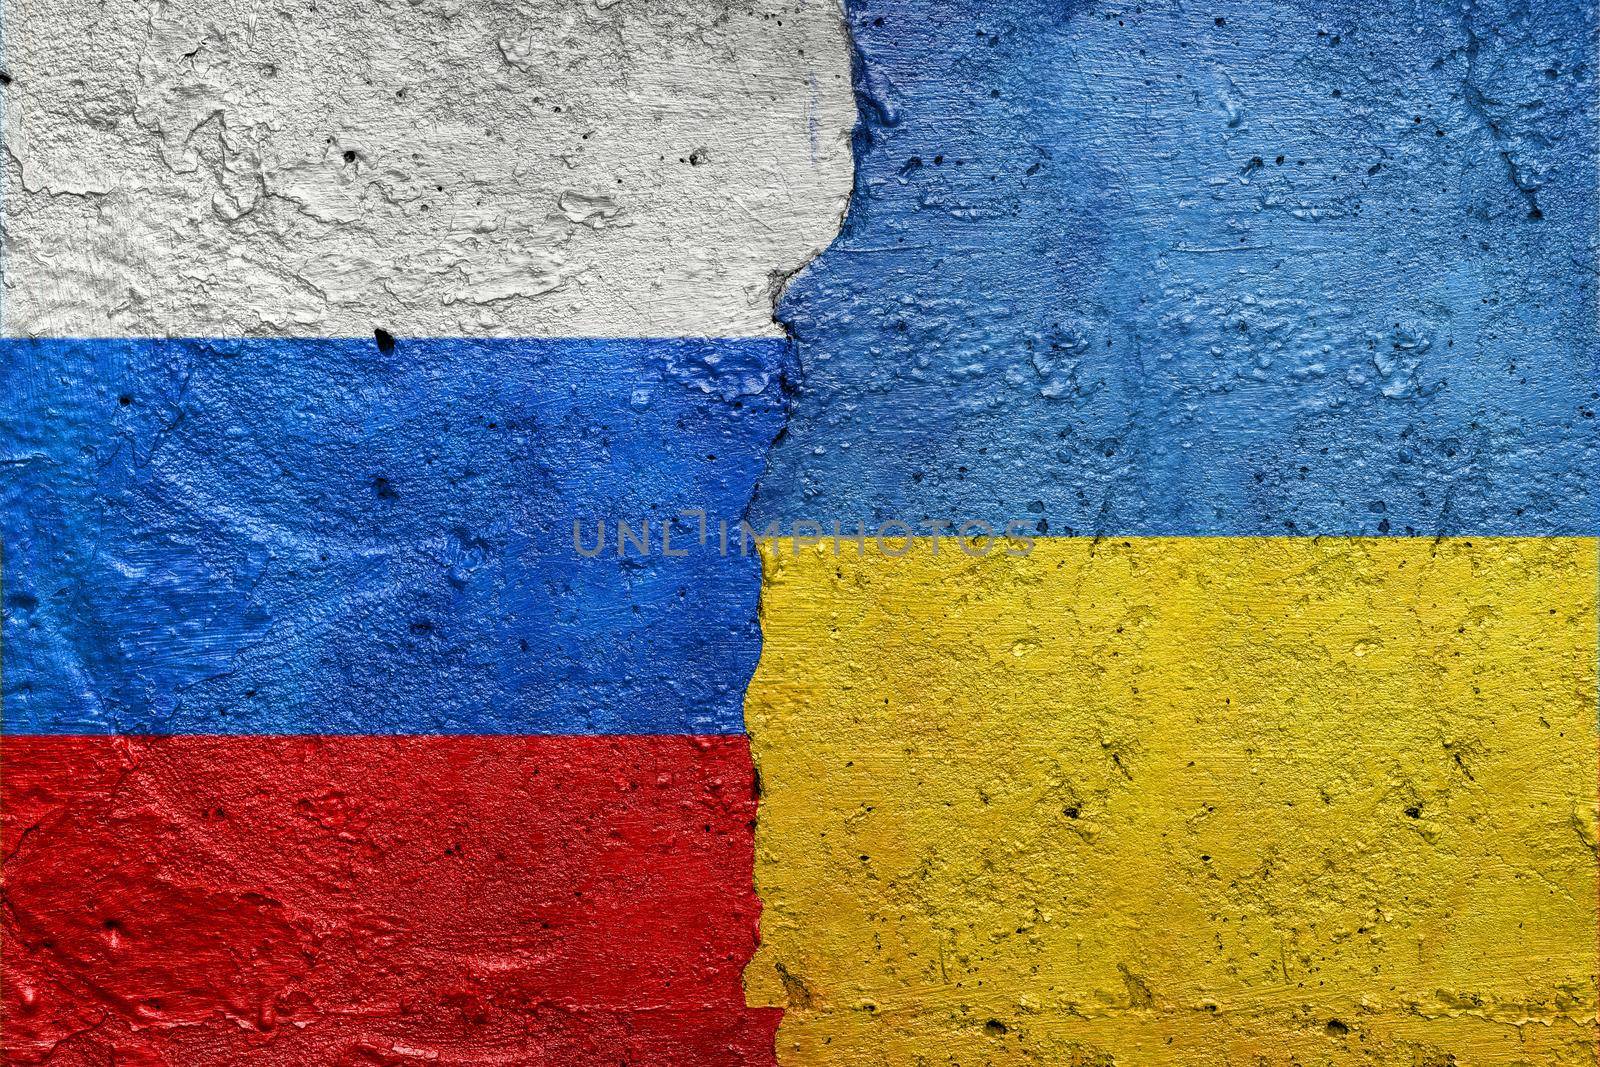 Russia vs Ukraine - Cracked concrete wall painted with a Ukrainian flag on the left and a Russian flag on the right